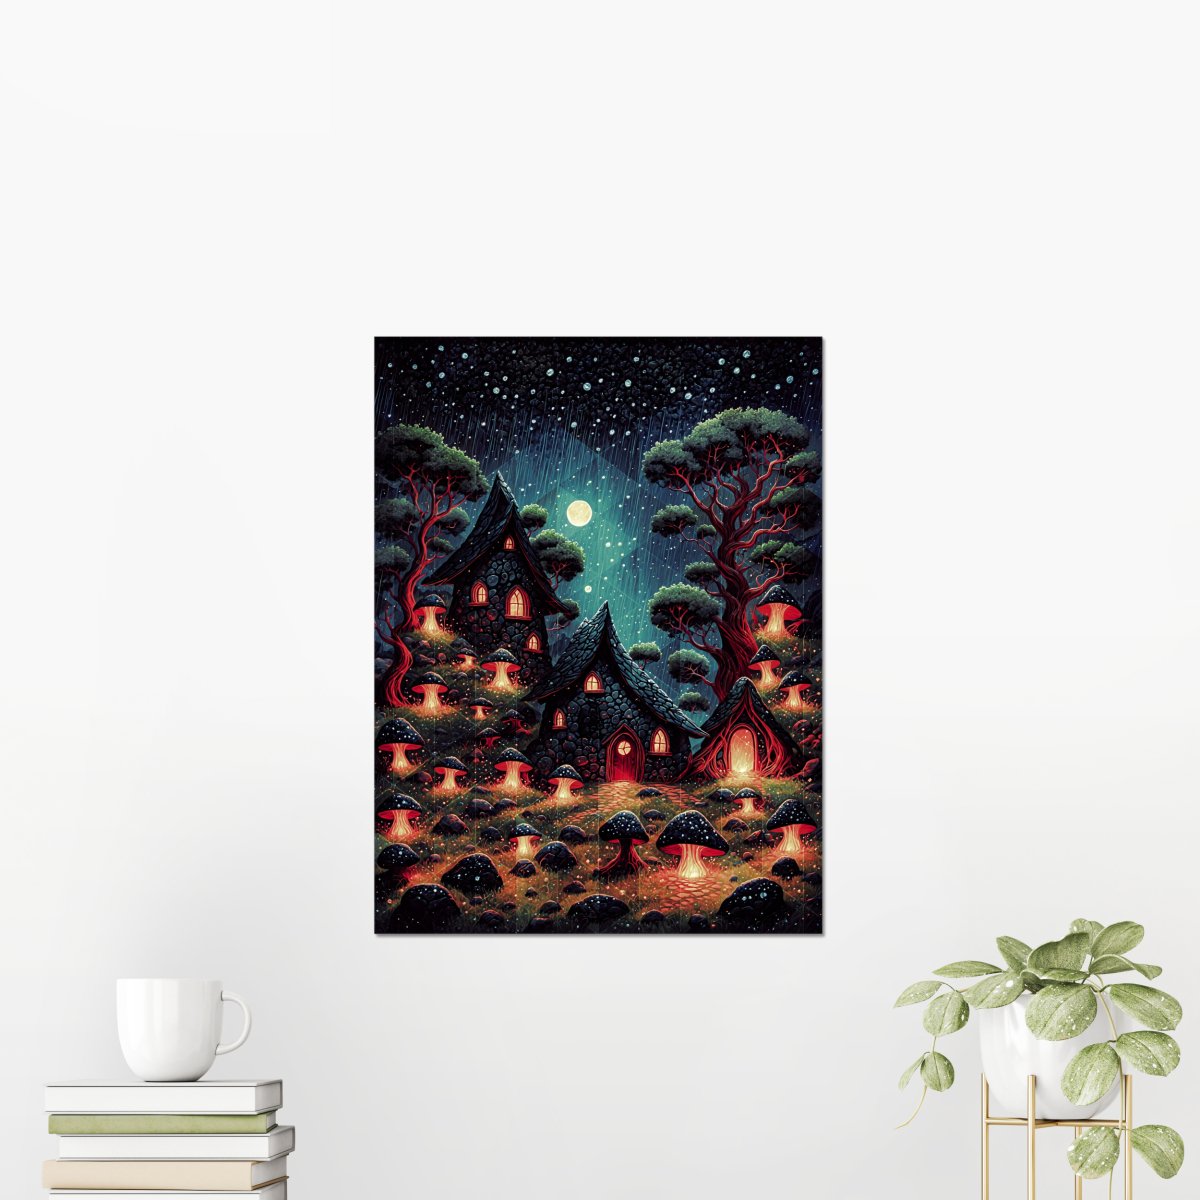 Unhinged amber glow - Art print - Poster - Ever colorful